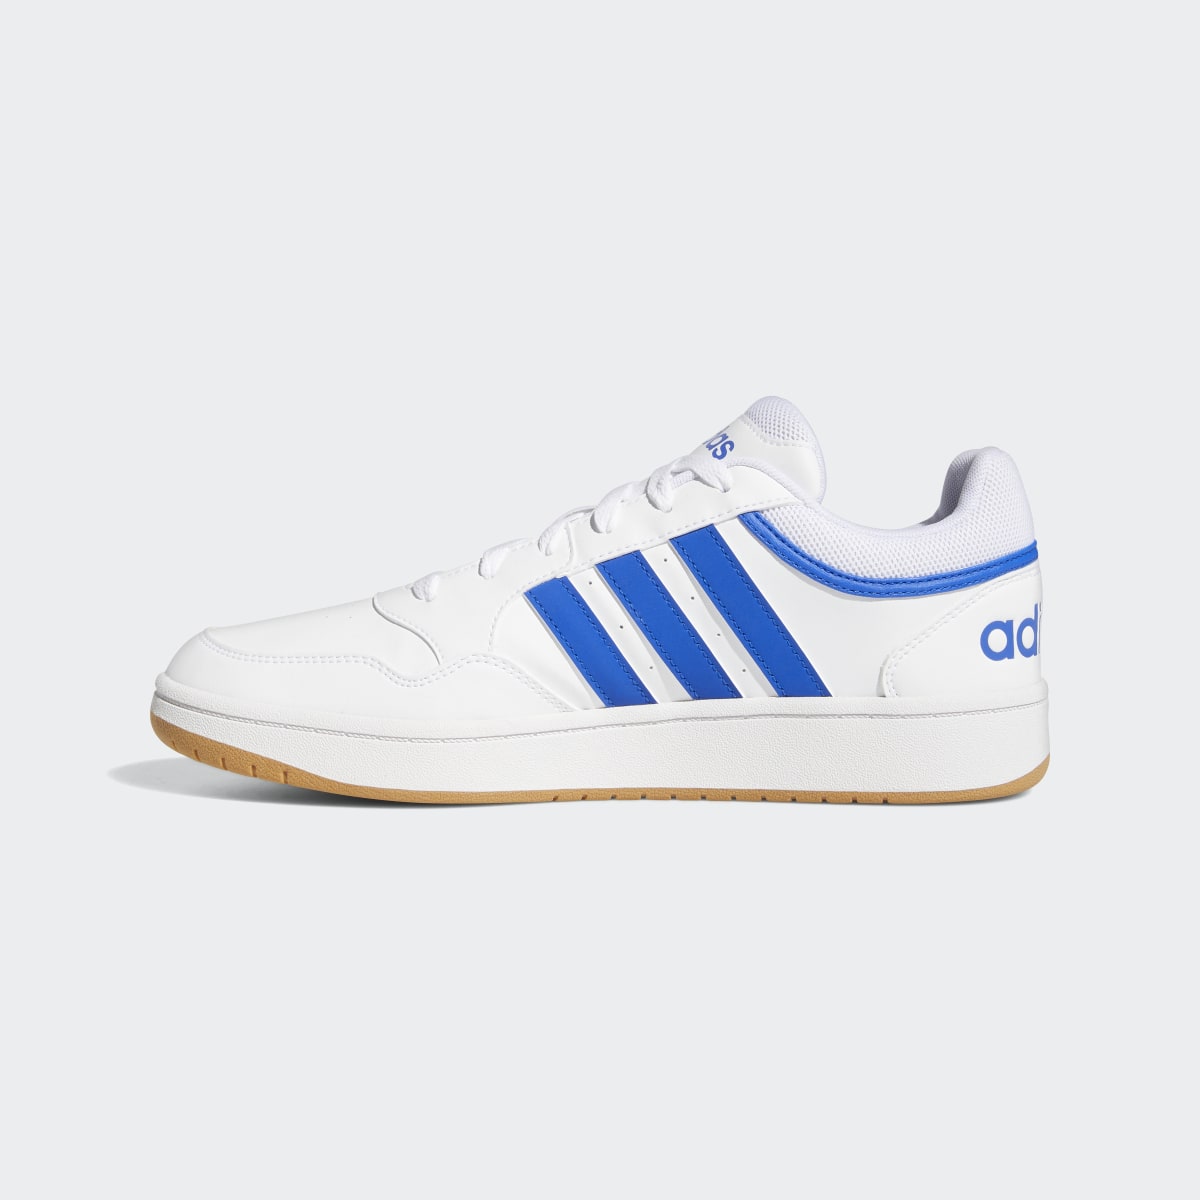 Adidas Hoops 3.0 Low Classic Vintage Shoes. 7